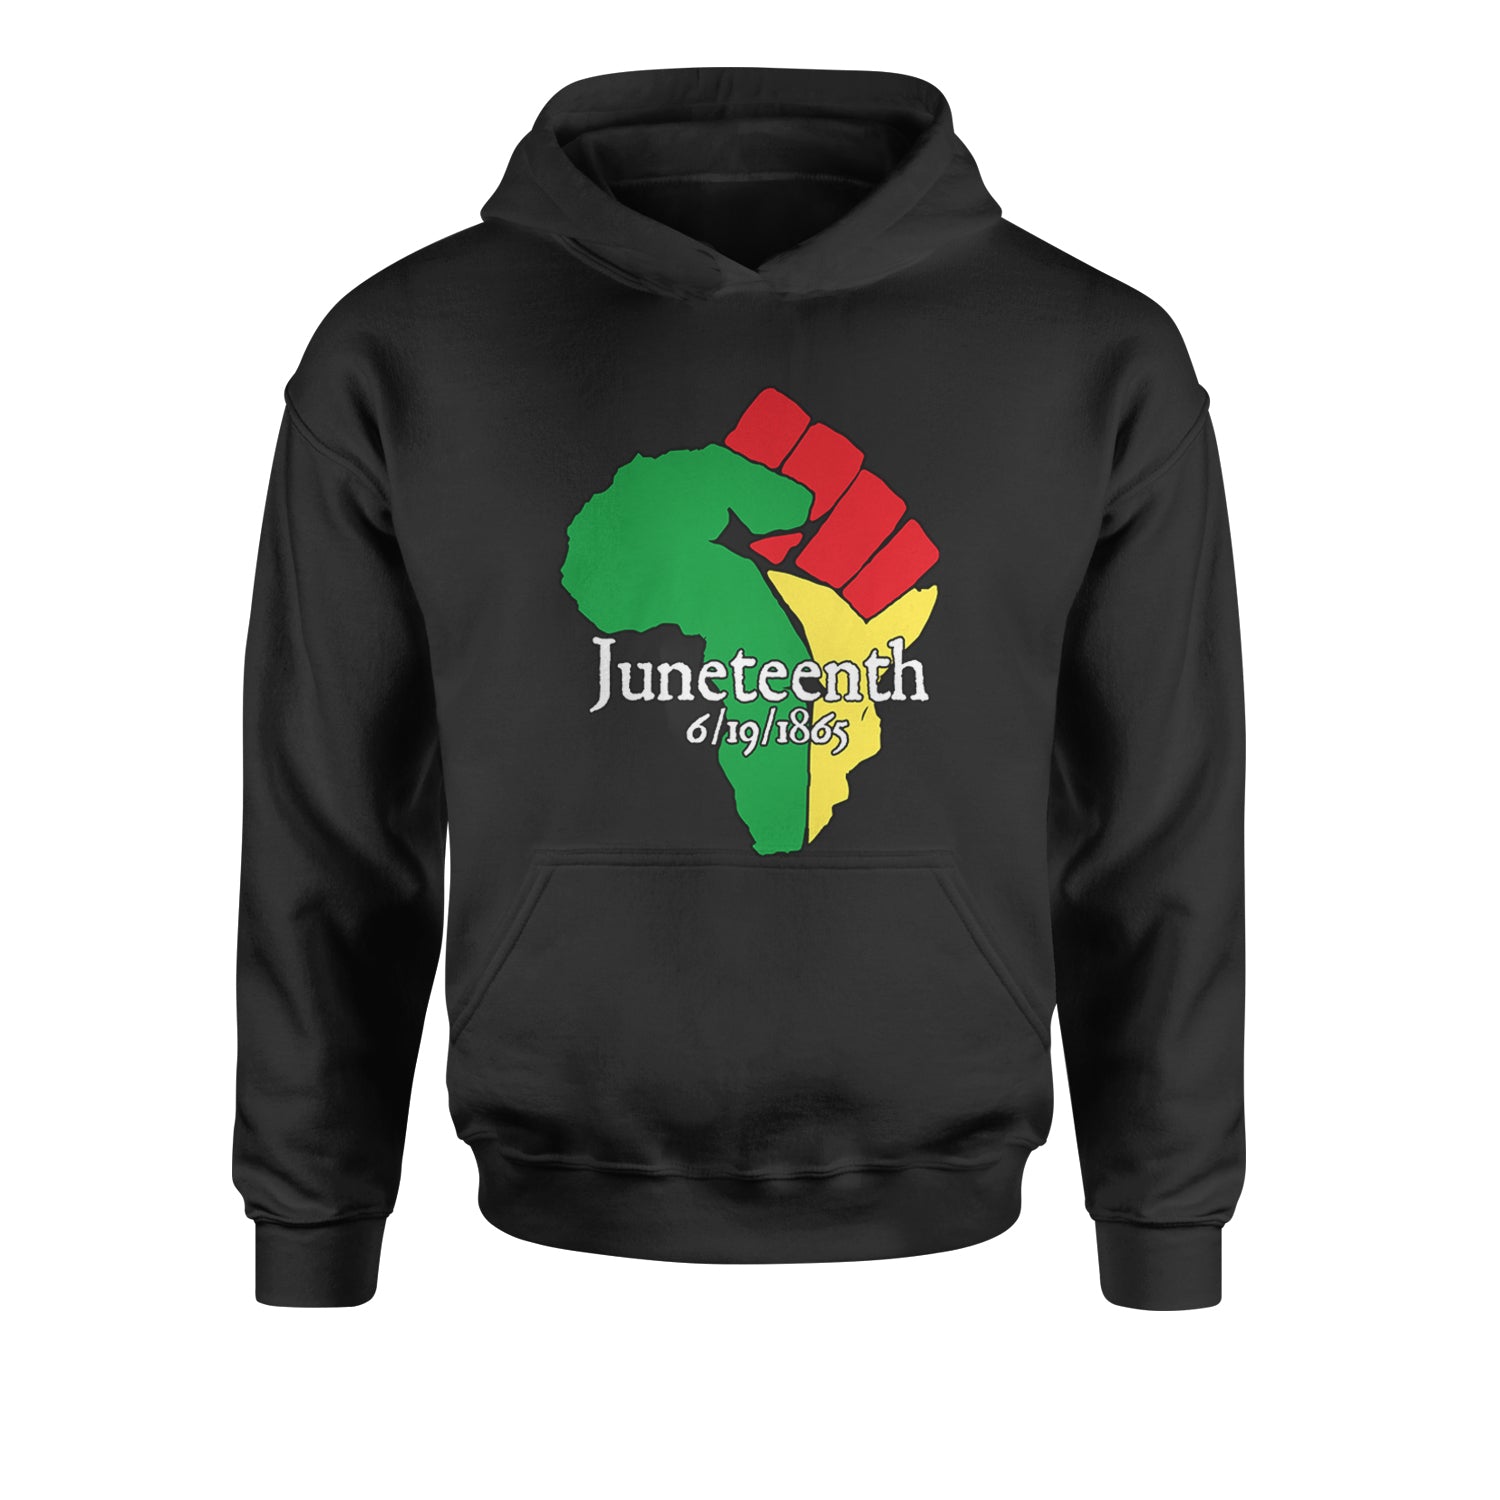 Juneteenth Raised Fist Africa Celebrate Emancipation Day Youth-Sized Hoodie